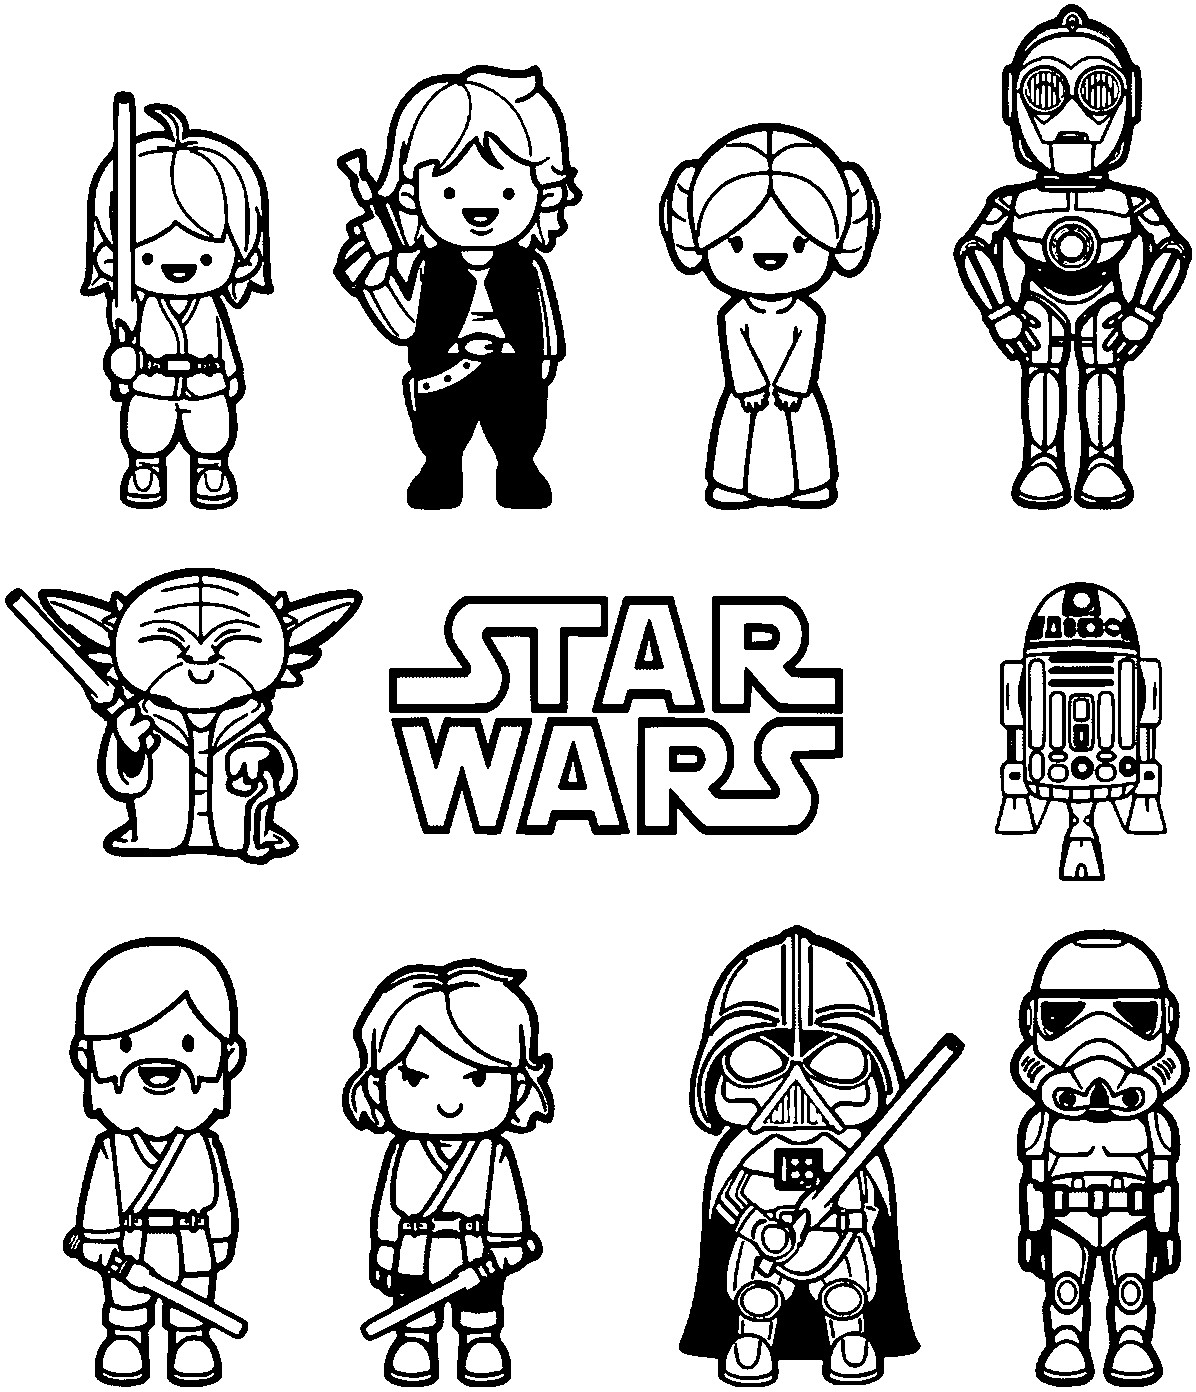 Lego Star Wars Coloring Pages To Print
 Star Wars Coloring Pages Free Printable Star Wars